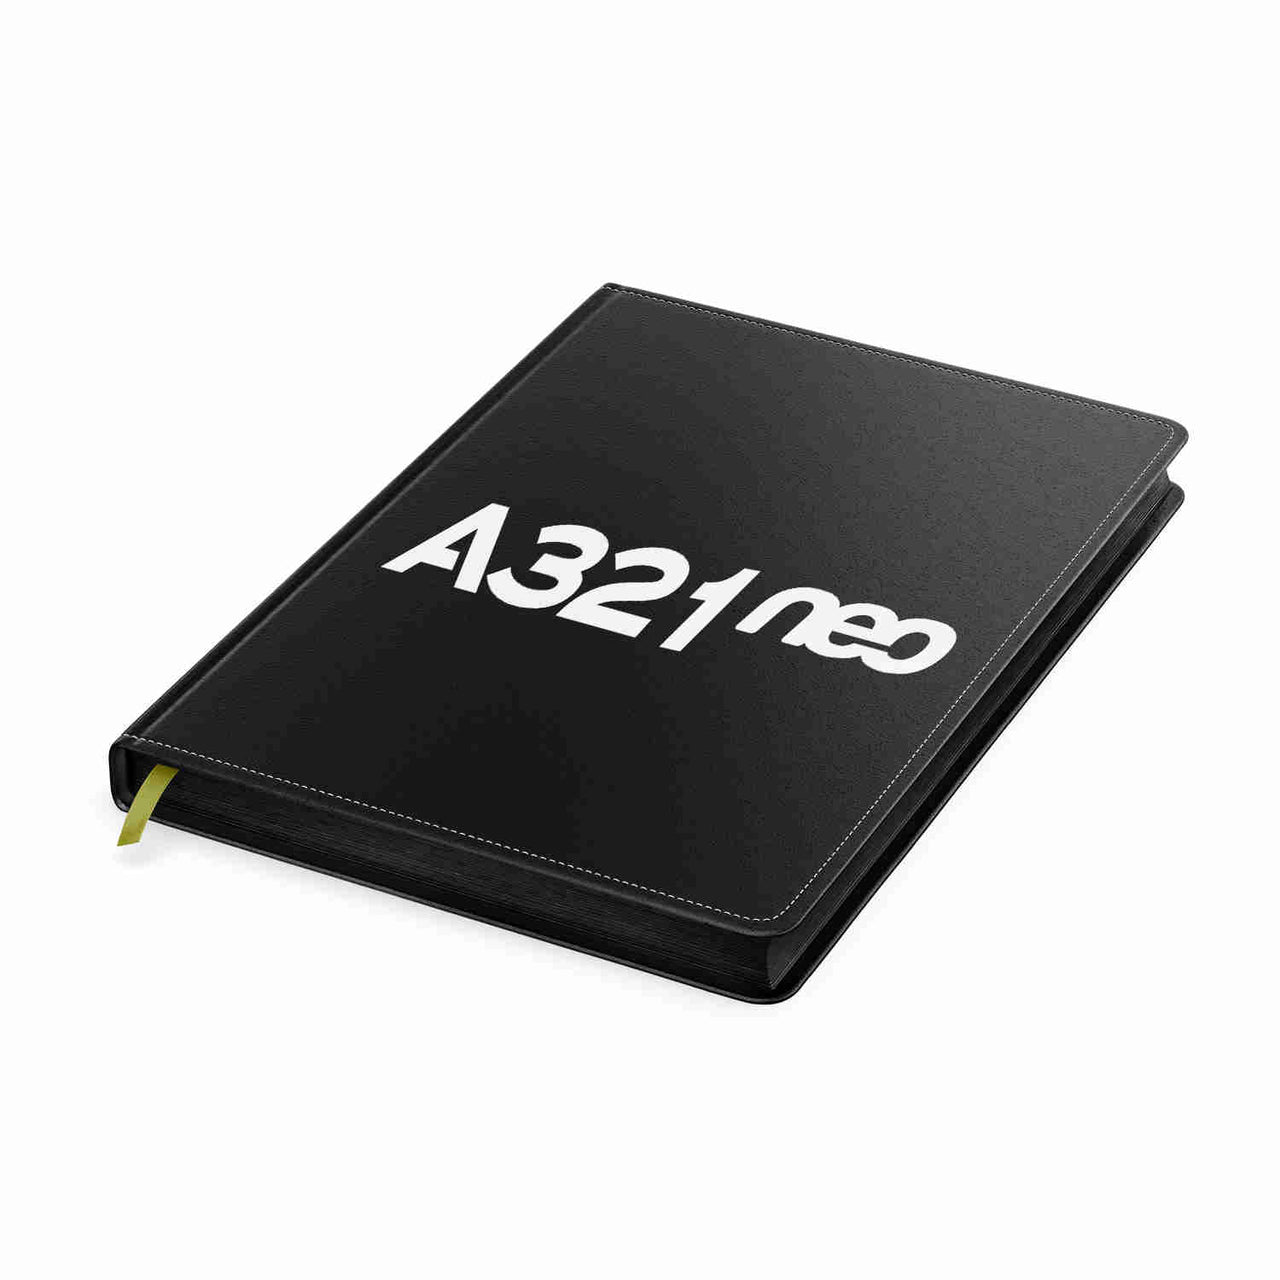 A321neo & Text Designed Notebooks